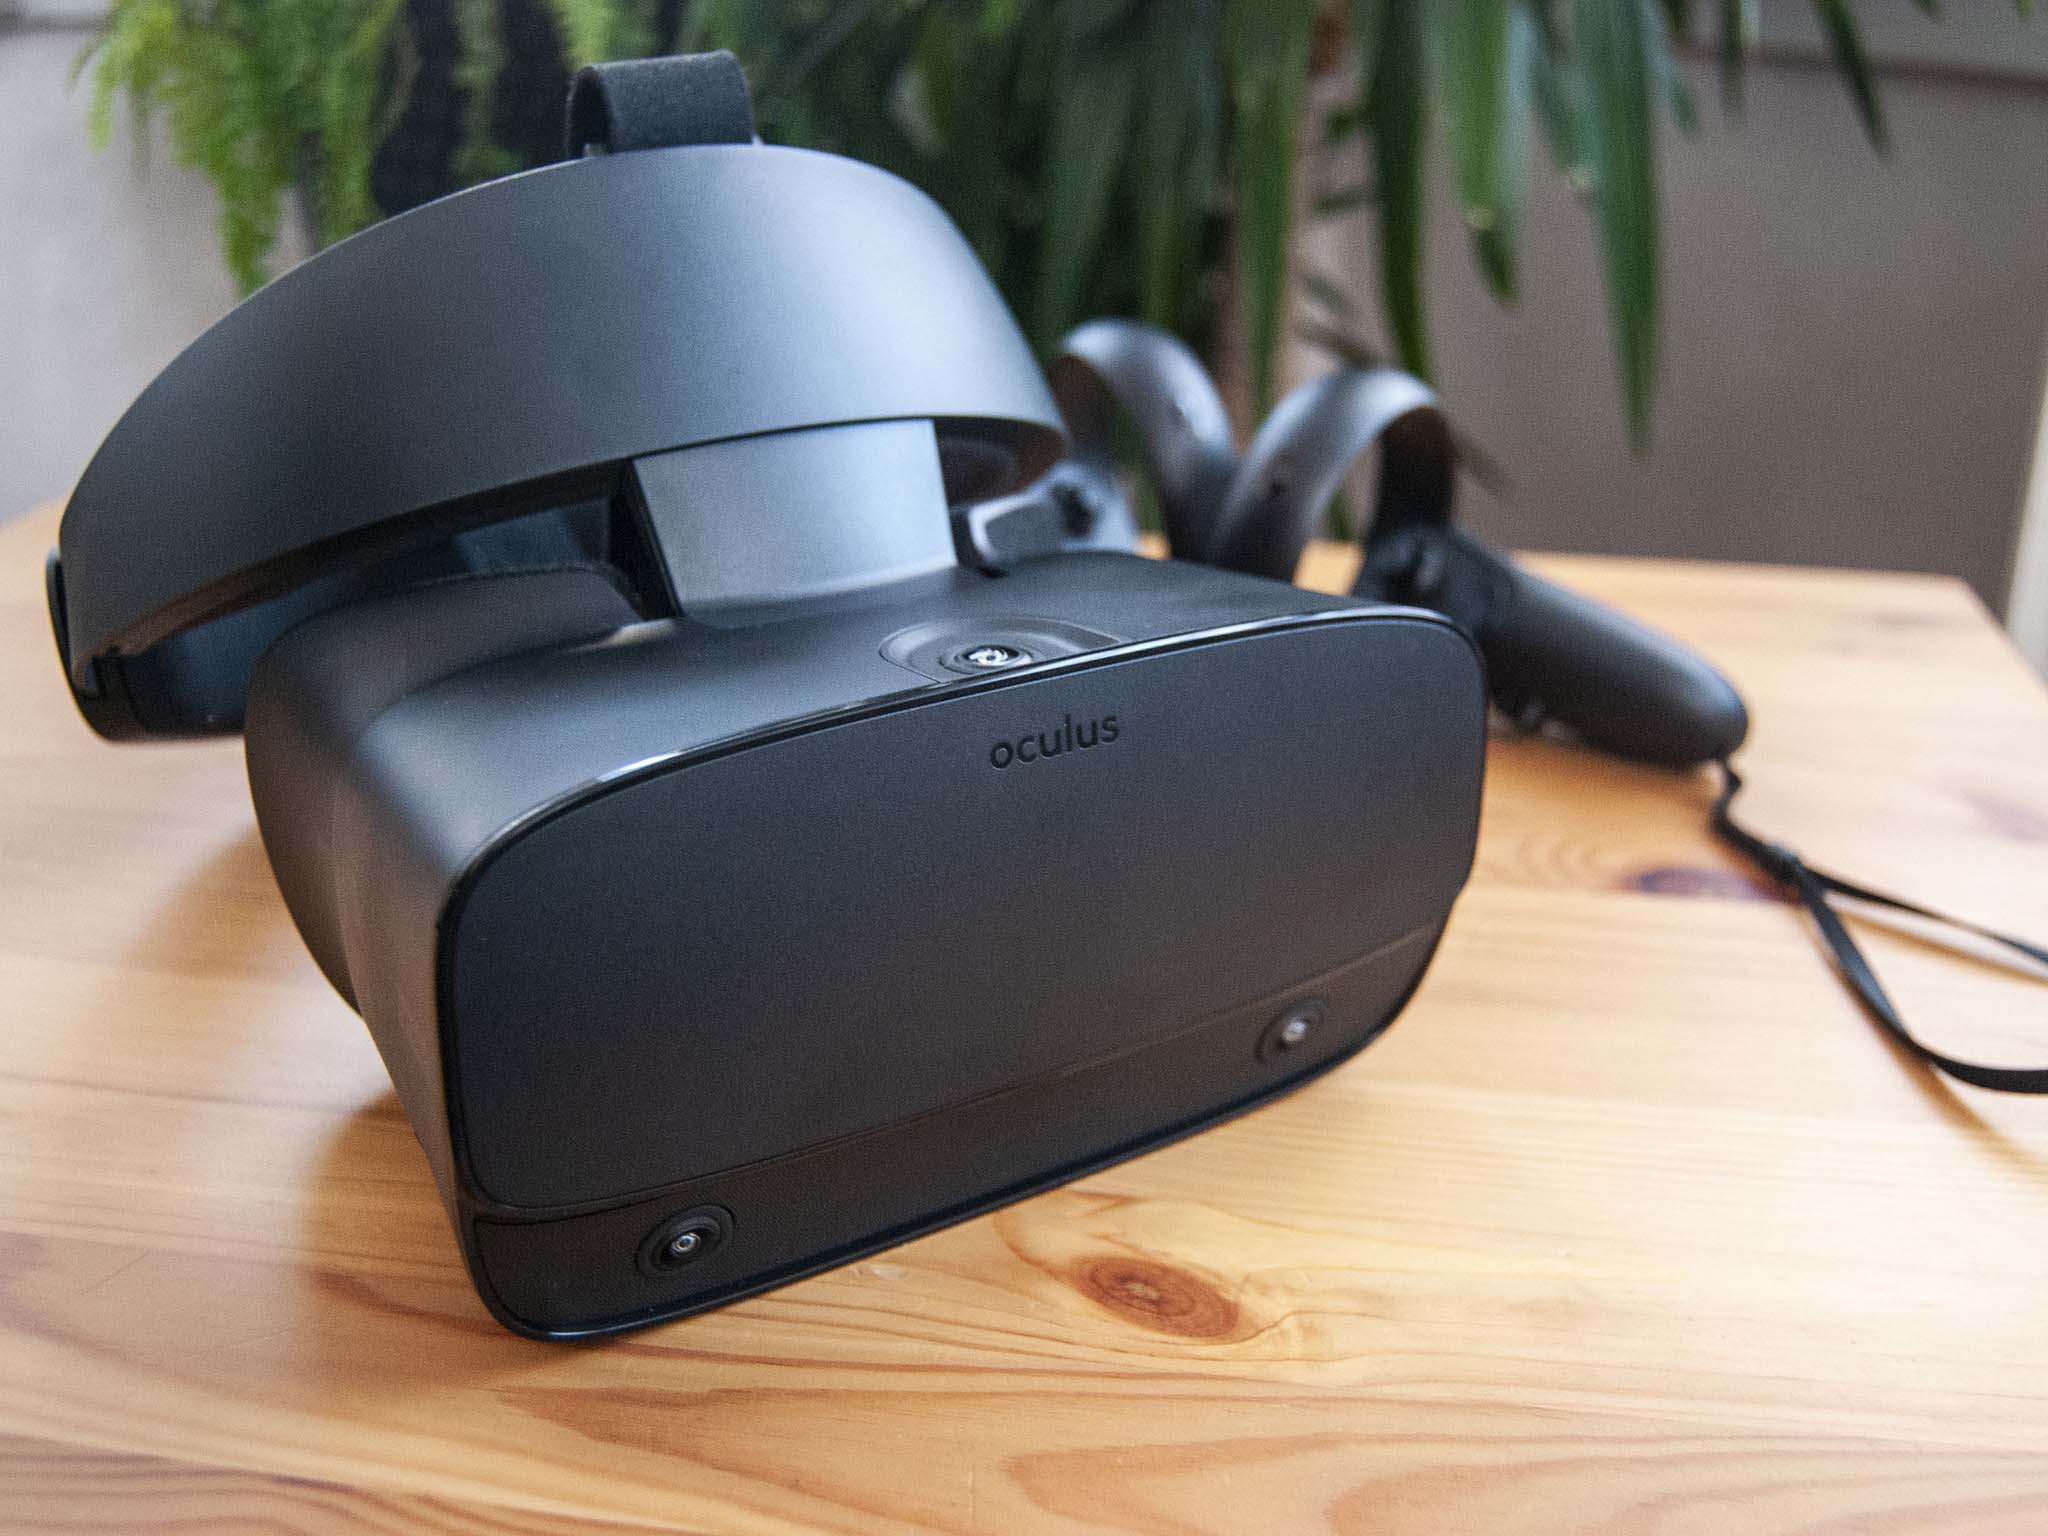 Oculus working on a fix to the Oculus Rift stuttering issues caused by